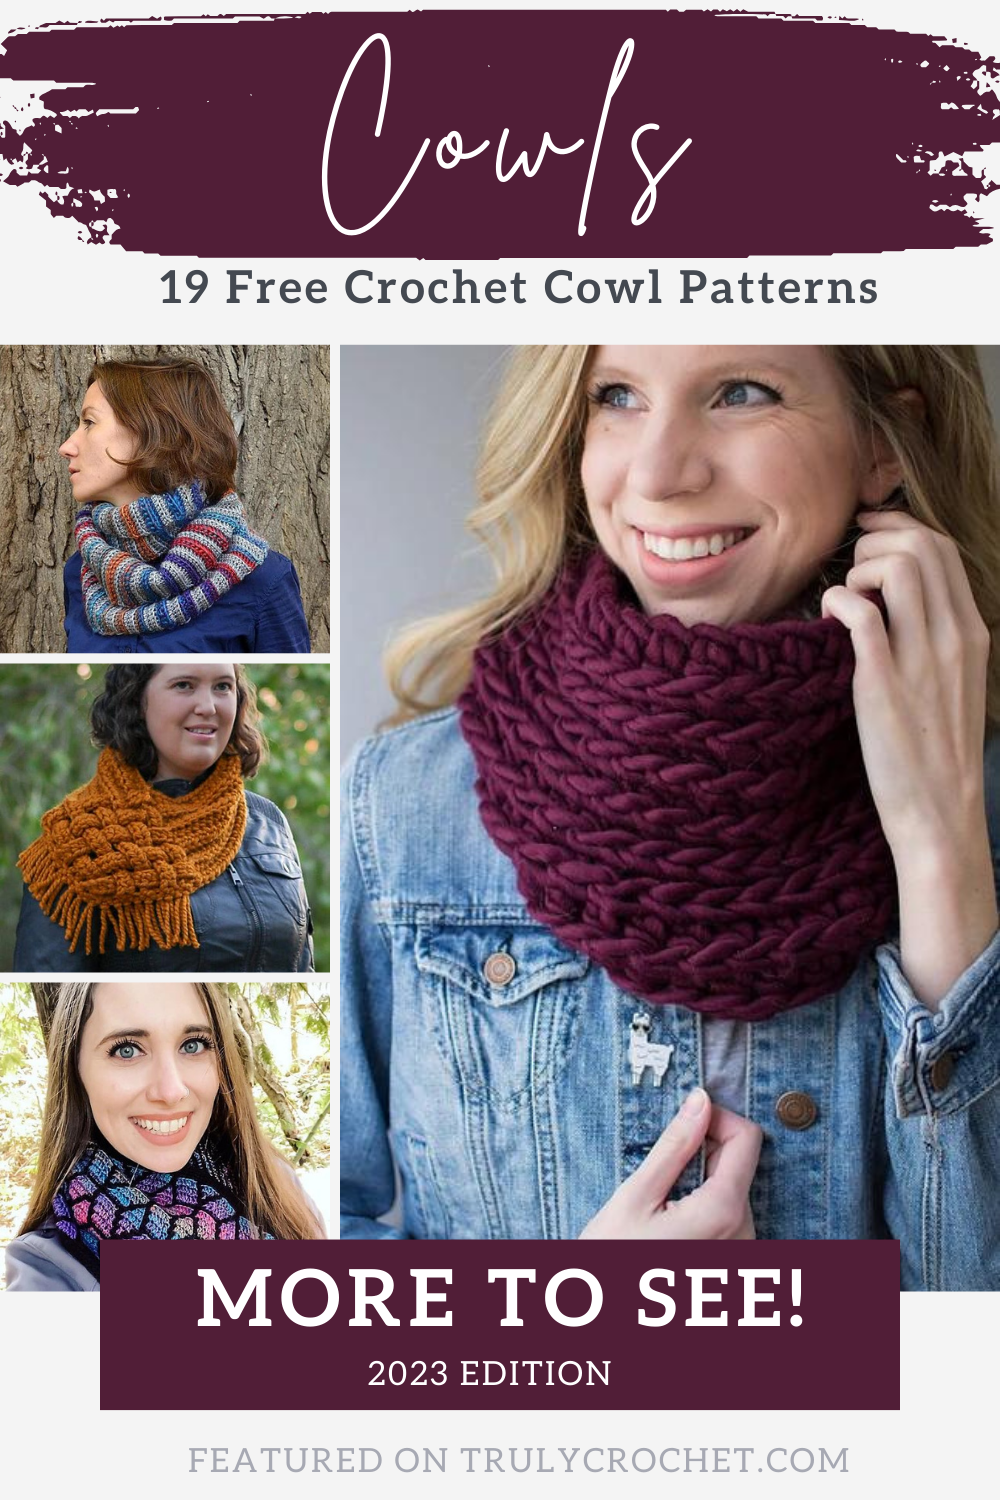 Simply Sophisticated Scarfie Sweater Free Crochet Pattern Tutorial